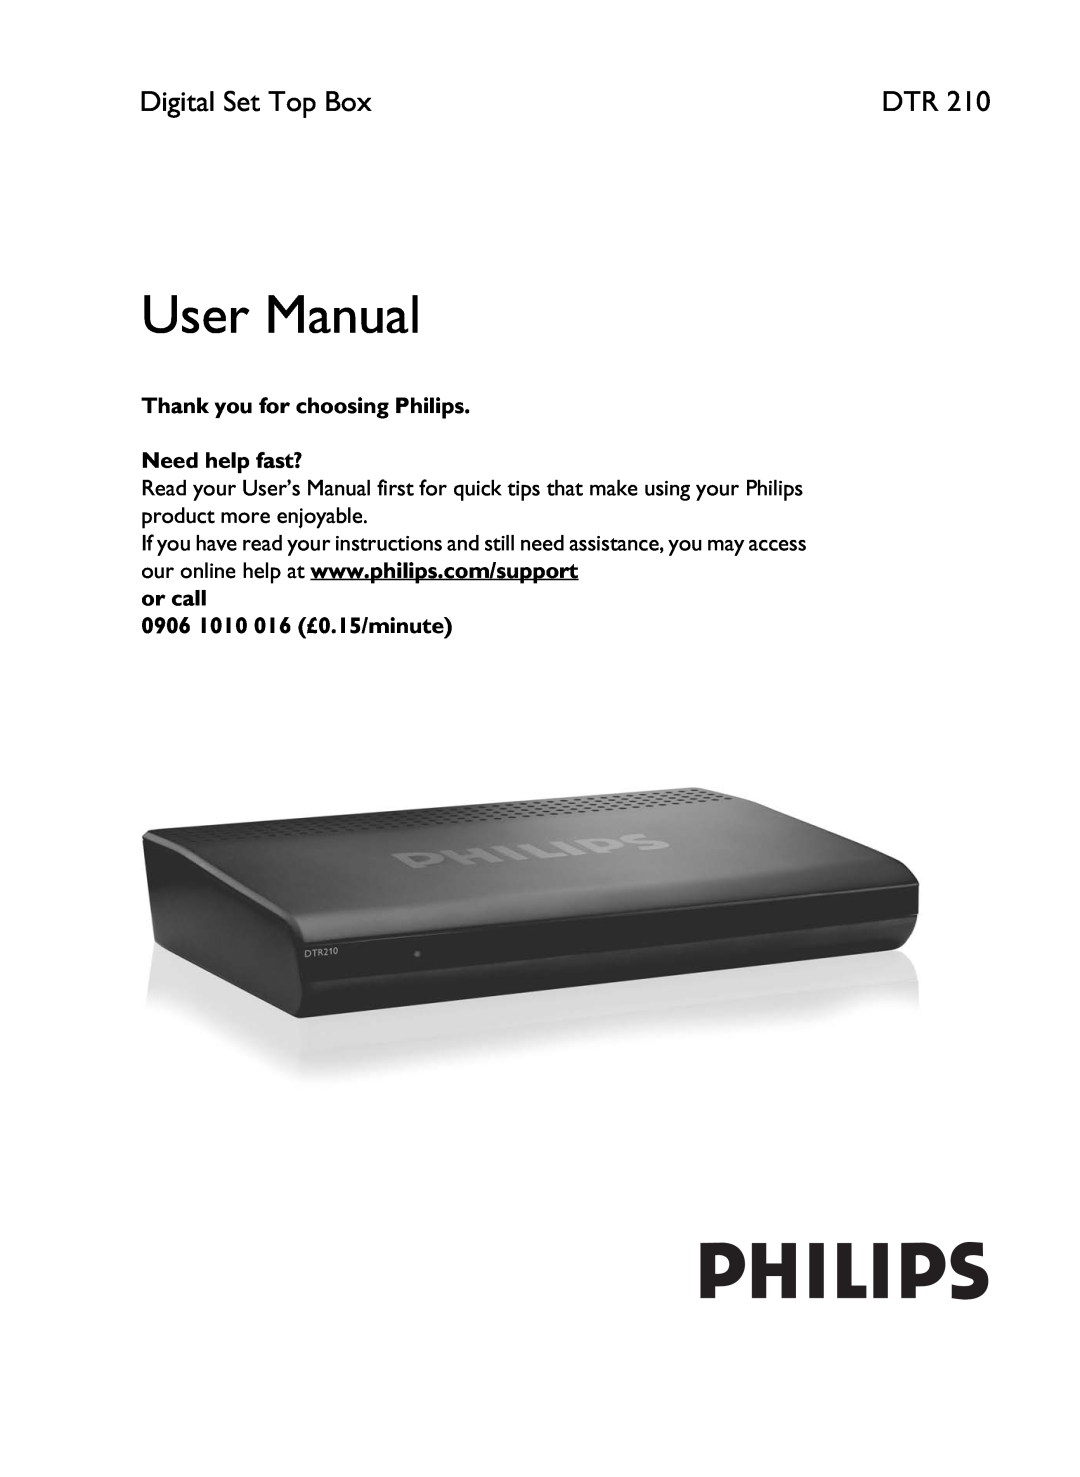 Philips DTR210 user manual Thank you for choosing Philips Need help fast?, or call 0906 1010 016 £0.15/minute 